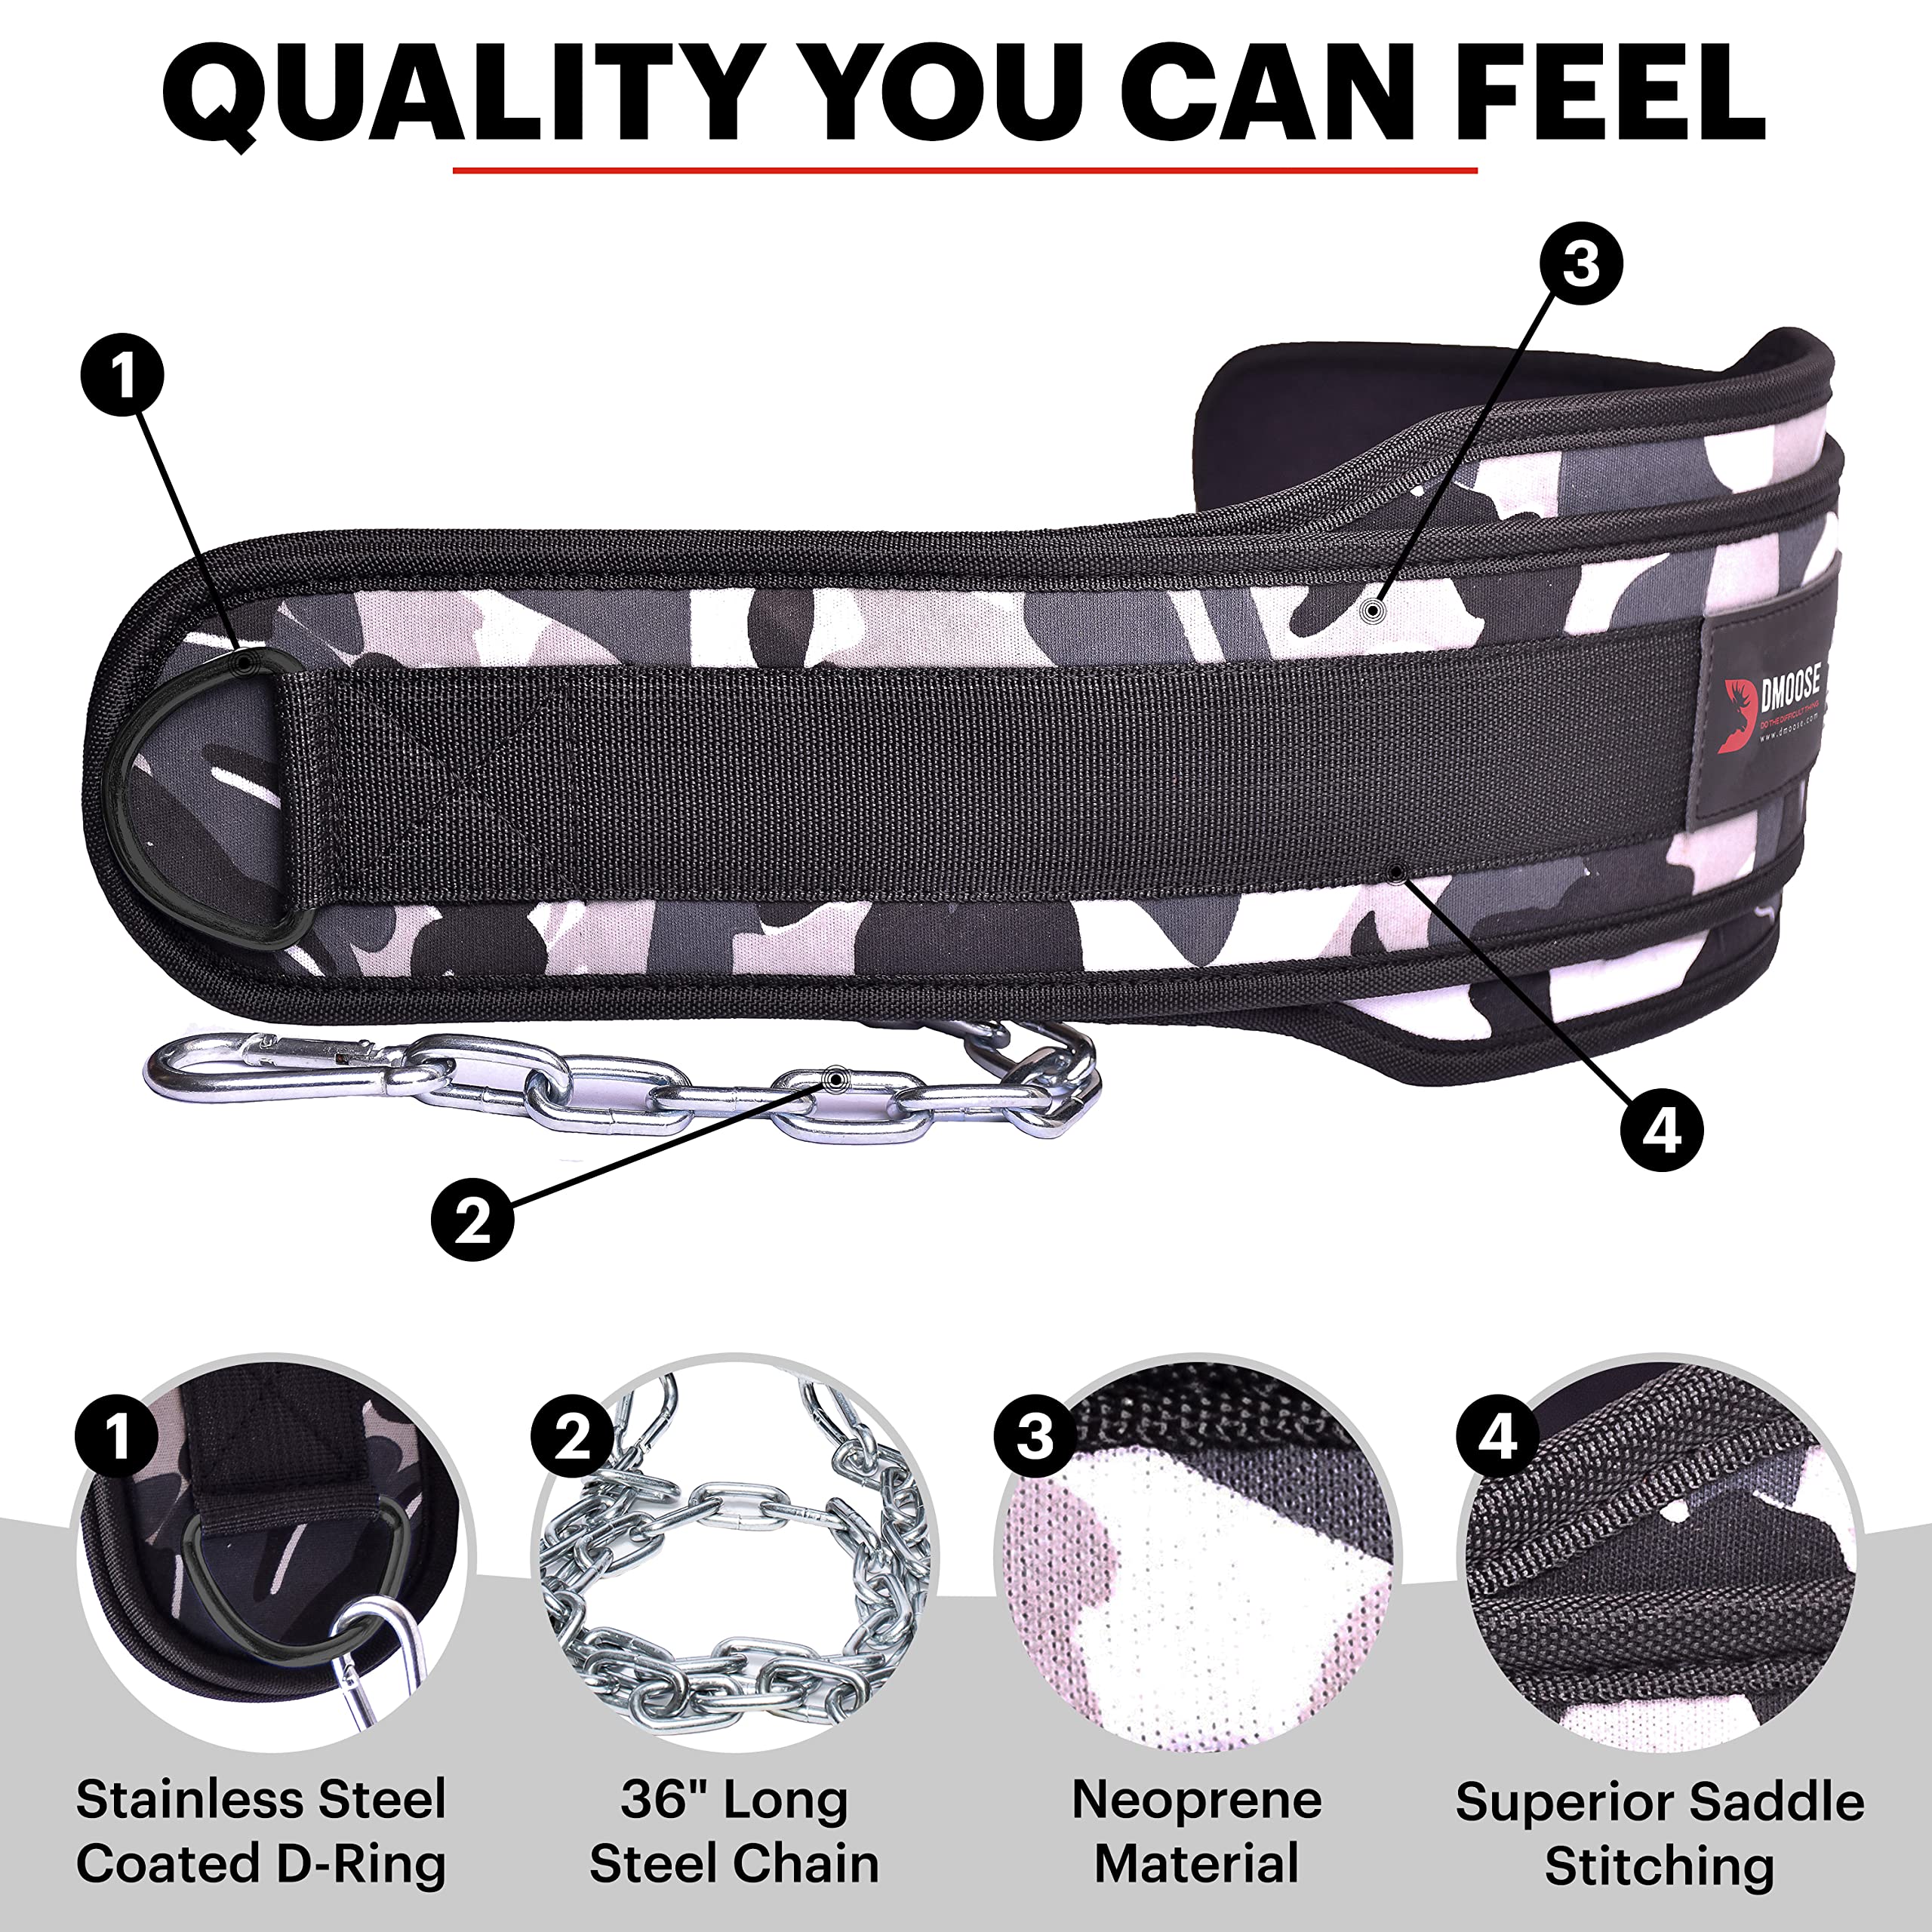 DMoose Fitness Dip Belt with Chain for Weightlifting, Pullups, Powerlifting and Bodybuilding, Gray Camo - image 4 of 6